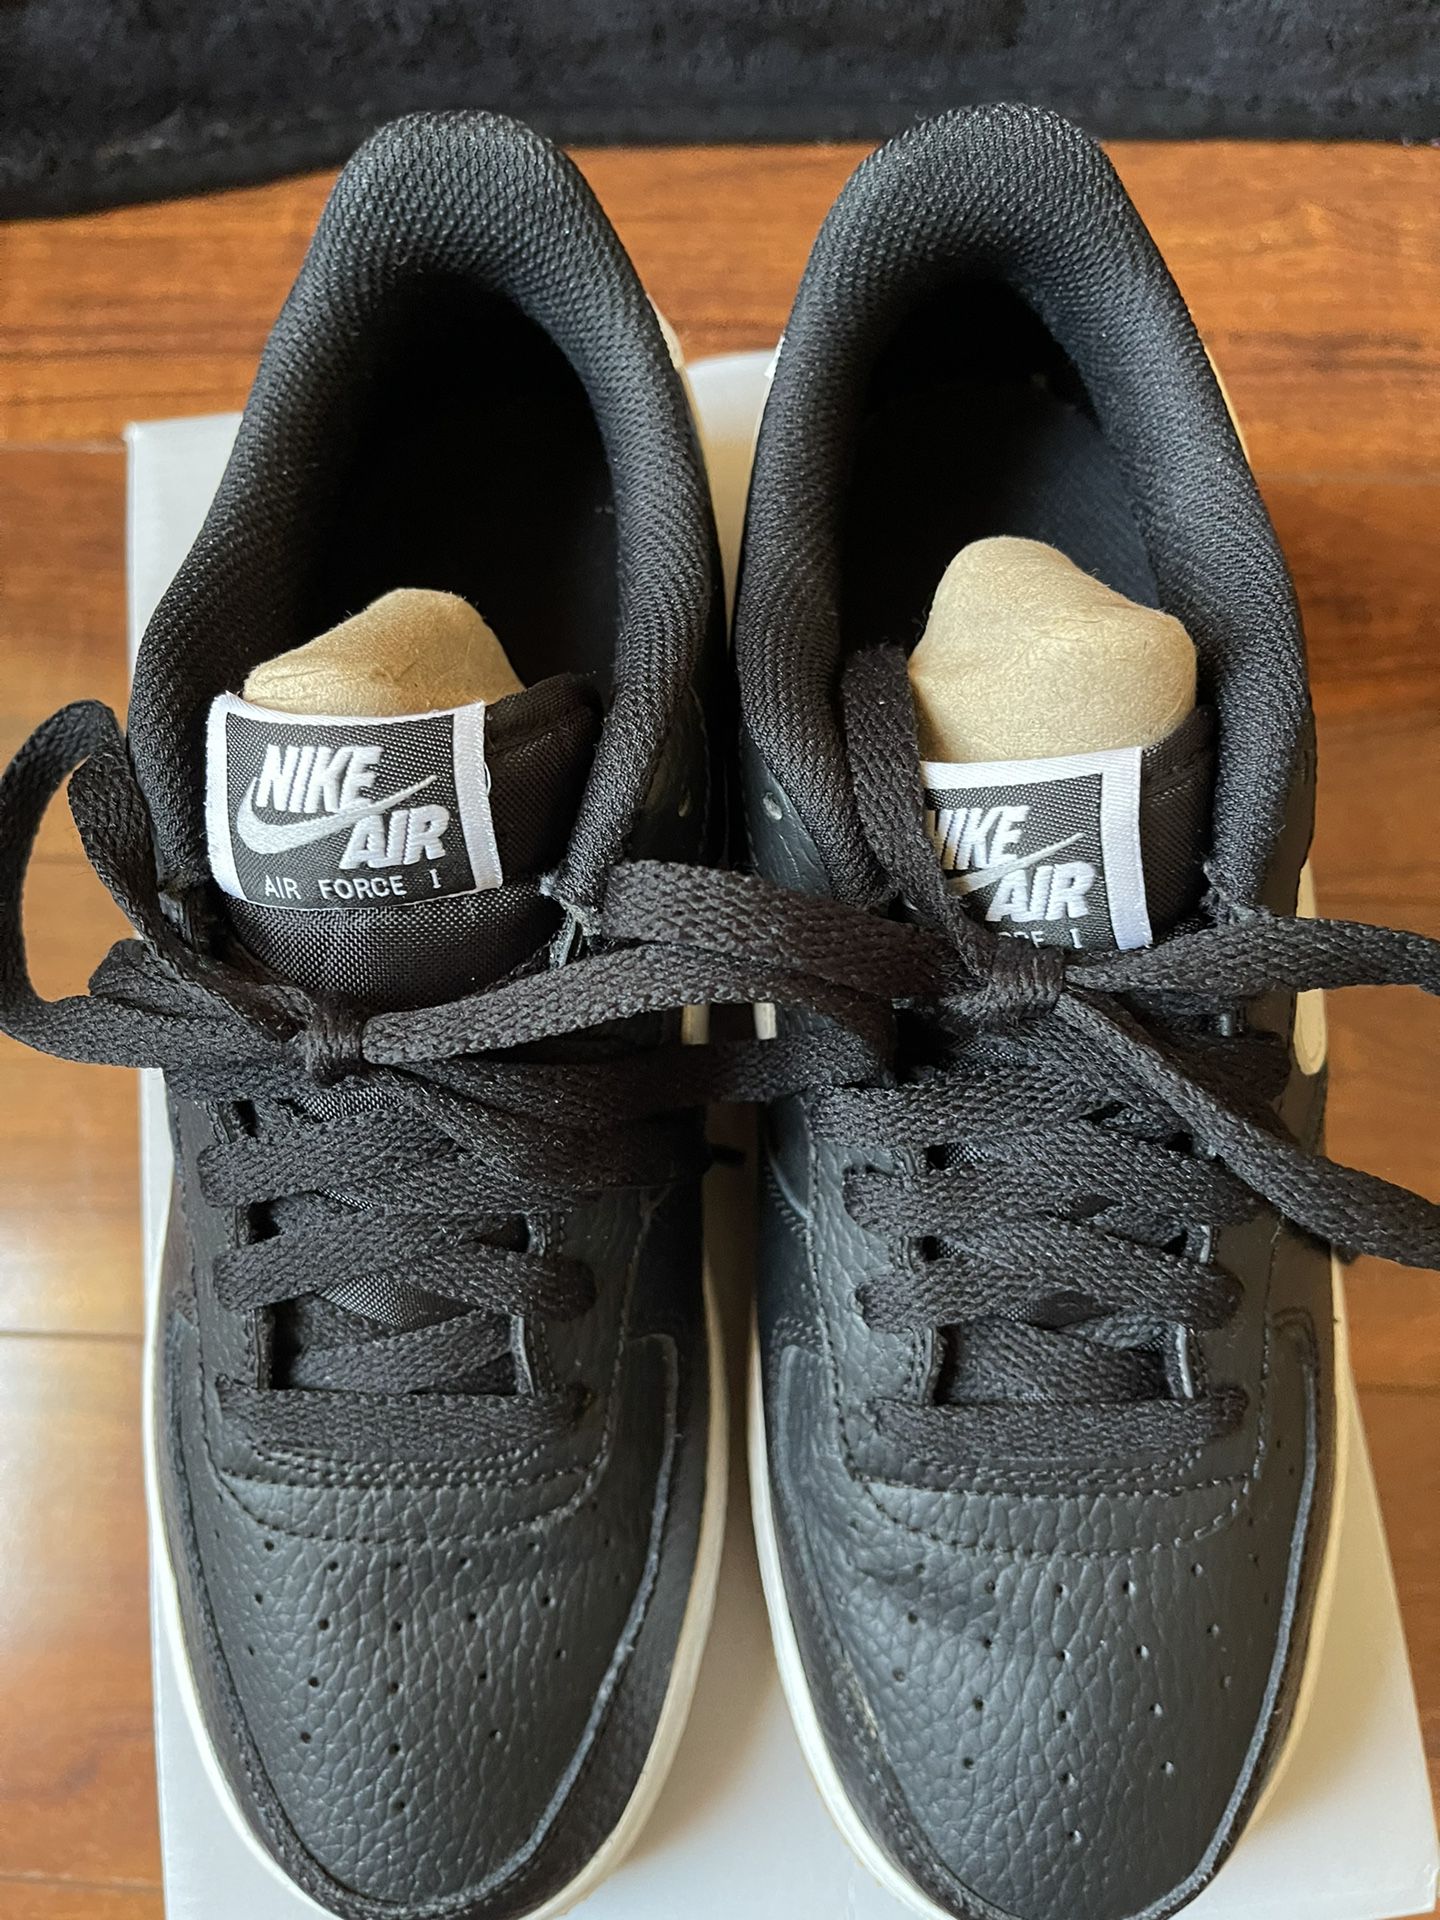 NIKE AF1 LV8 Utility (GS) “Overbranding” for Sale in San Diego, CA - OfferUp